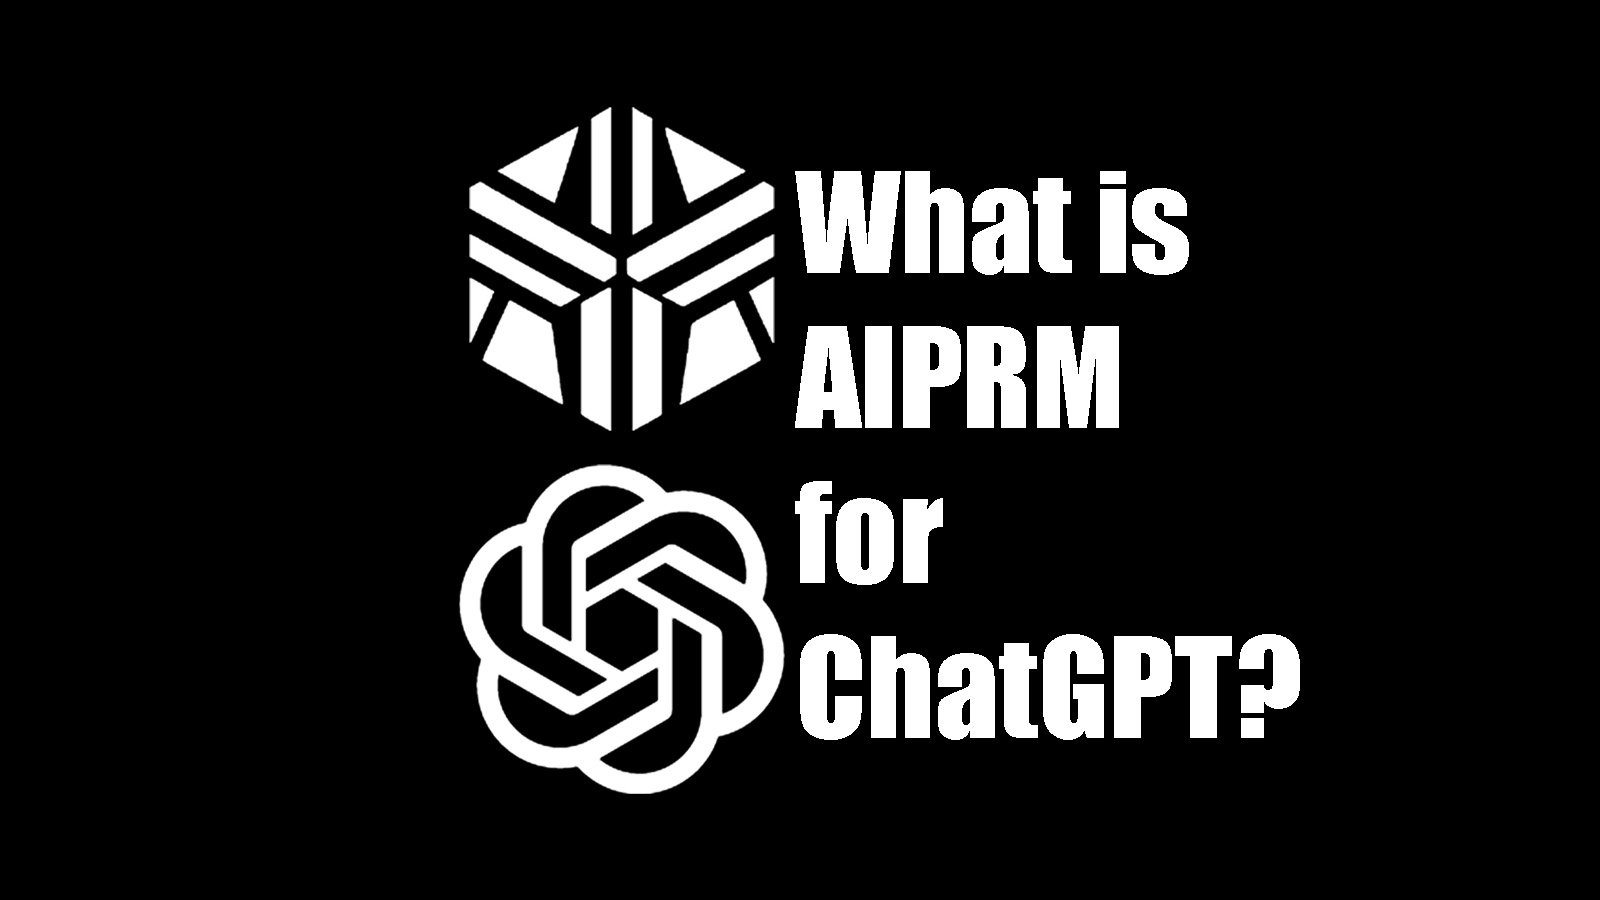 AIPRM for ChatGPT